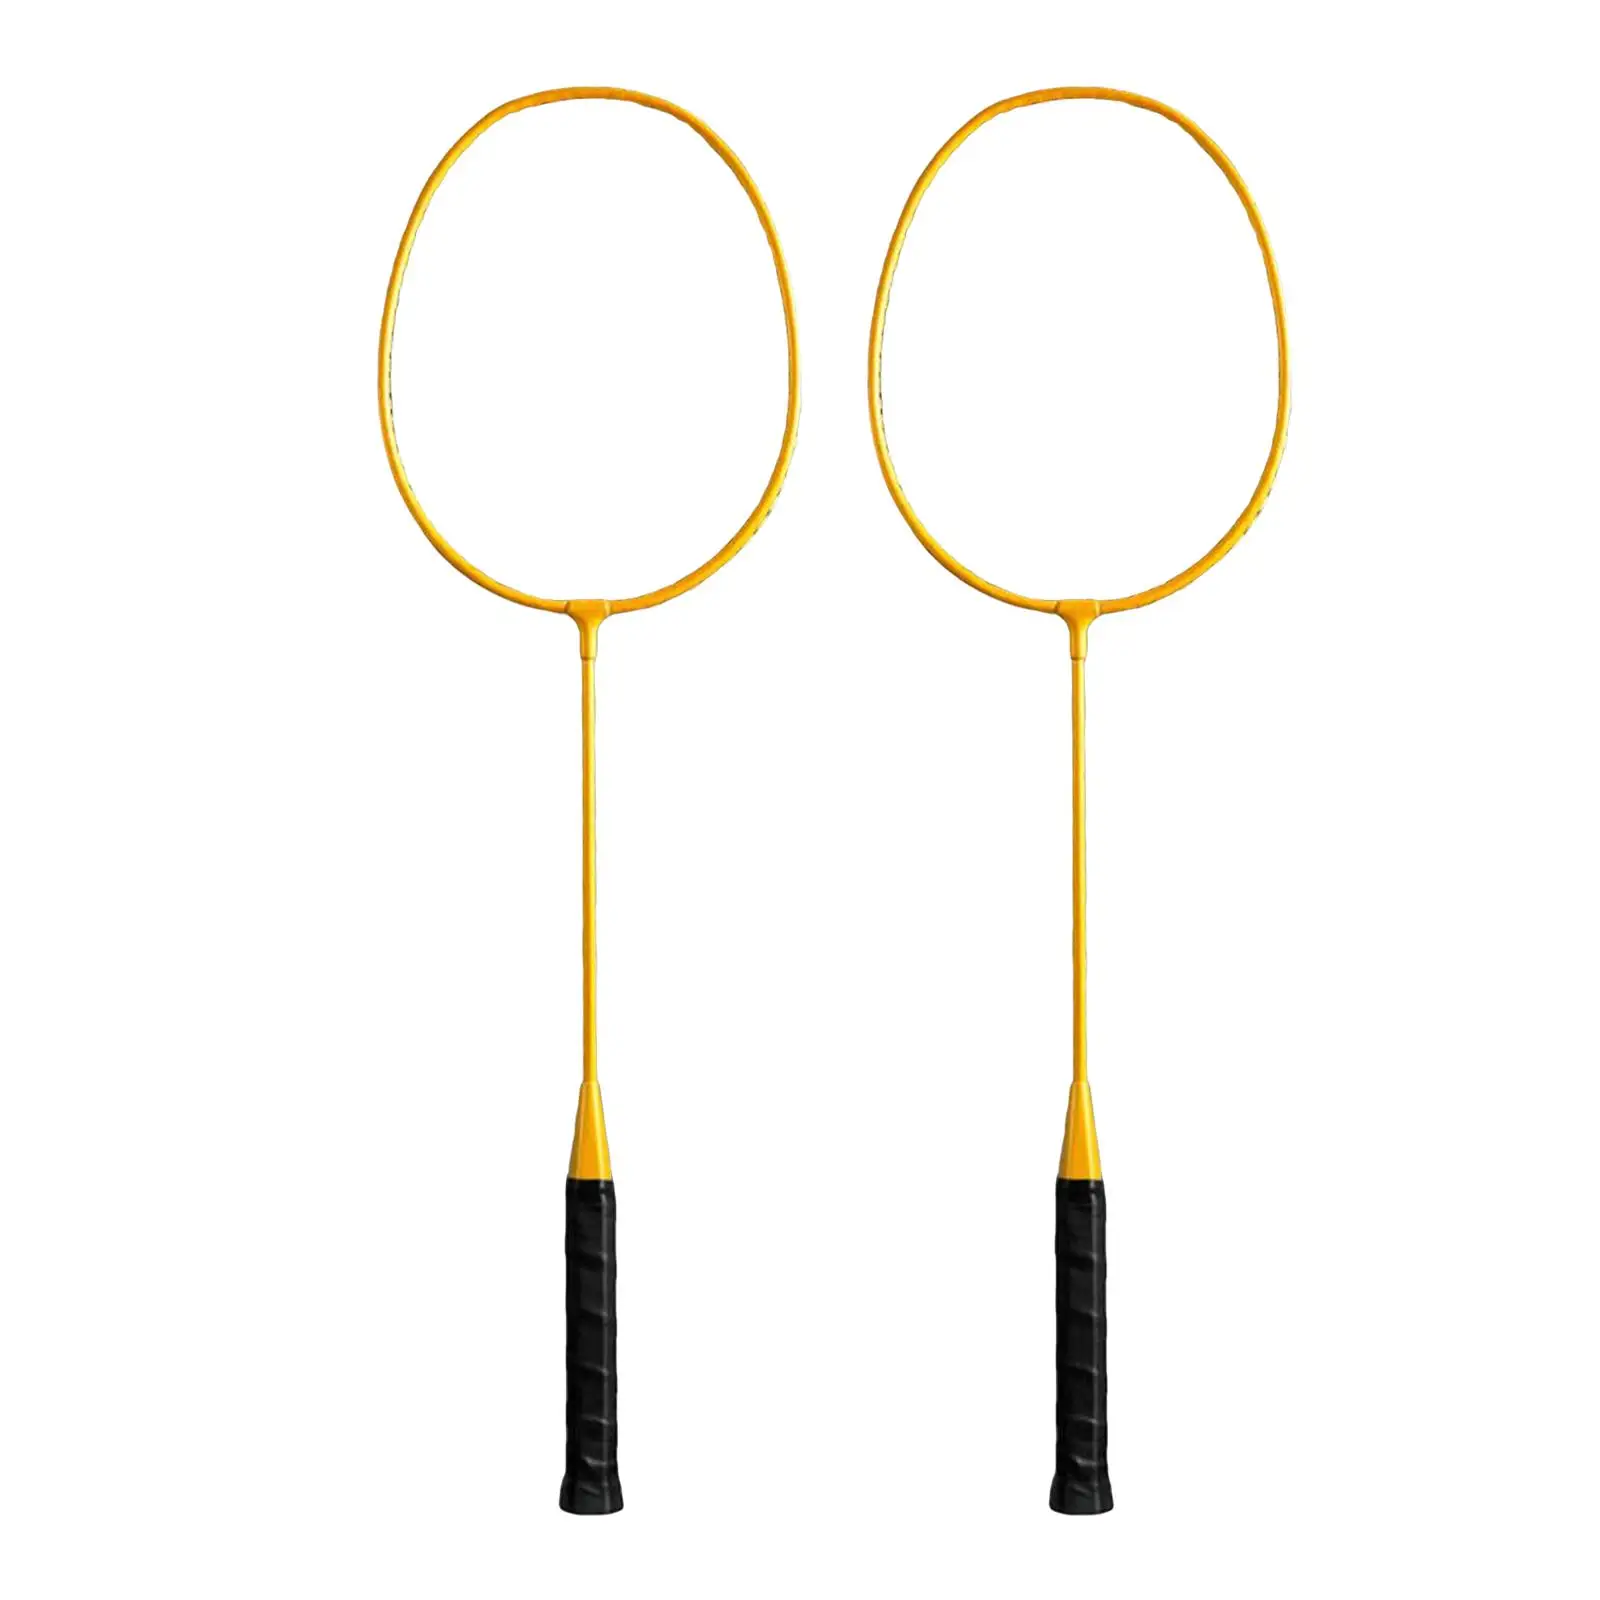 2x Badminton Rackets Set Double Racquets for Game Backyards Indoor Kids Adults Family